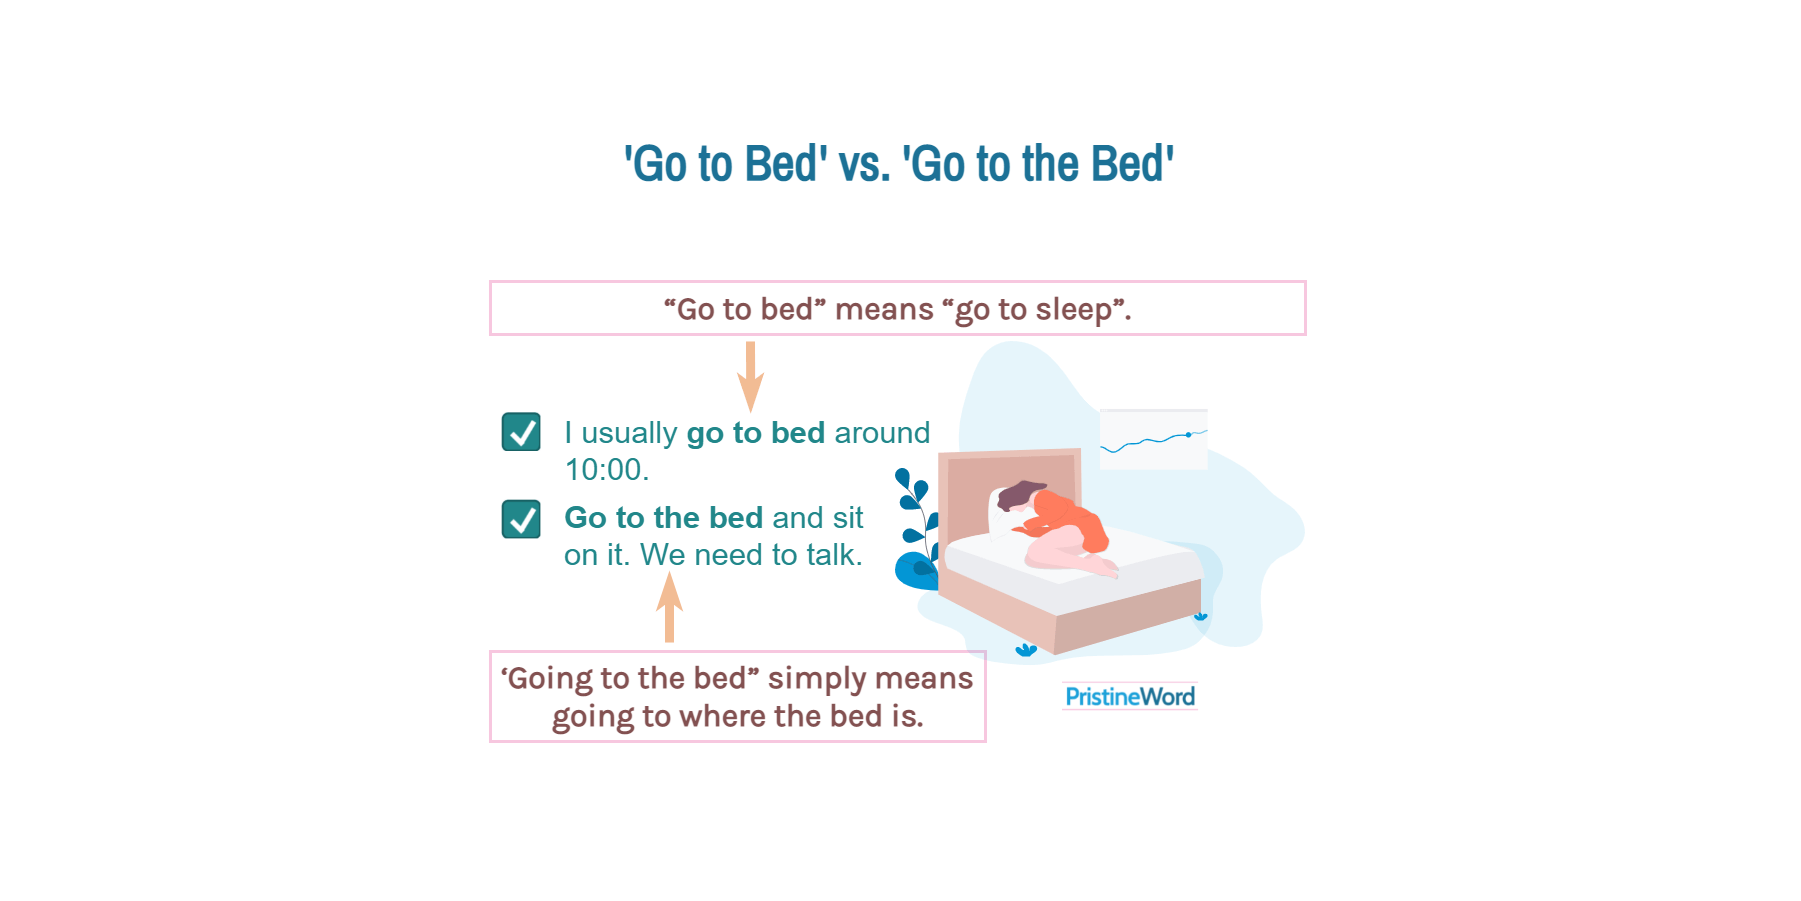 'Go to Bed' vs. 'Go to the Bed'